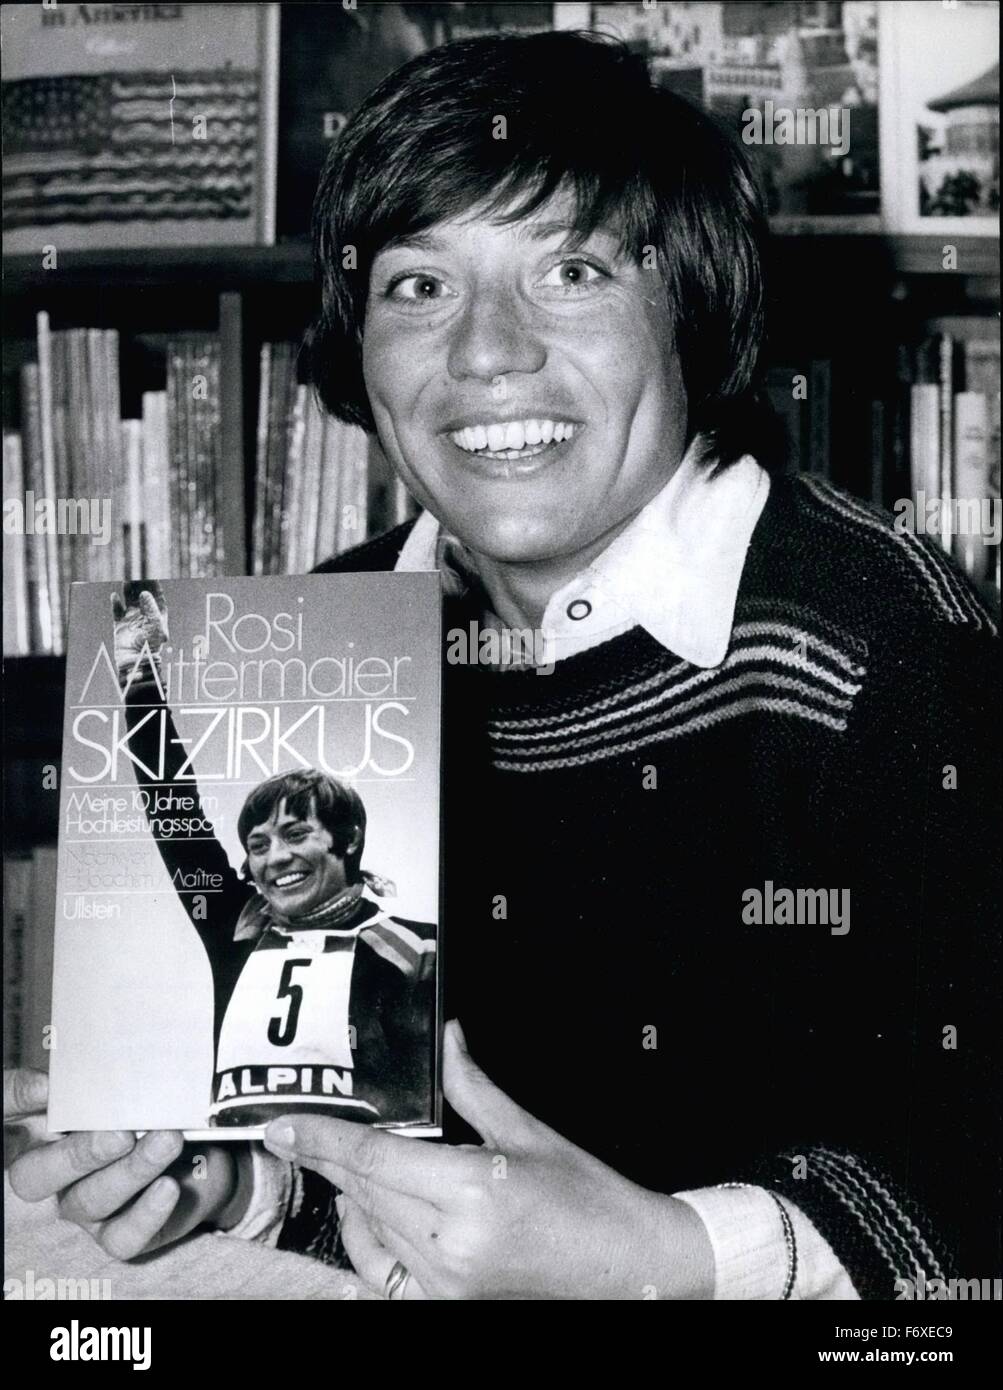 1977 - Rosi Mittermaiter Signed Her Book ''Ski-Zirkus'': ''Ski-Zirkus: is the title of new book just been published in the Federal Republic of Germany and written by famous Rosi Mitermaier (Rosi Mittermaier). Now the Olympic winner of Innsbruck is on signature-tour though Germany (here in a Hamburg book-shop). the book ''ski-Zirkus'' (''Ski-circus'') contains 224 page3s and also 58 illustration. © Keystone Pictures USA/ZUMAPRESS.com/Alamy Live News Stock Photo